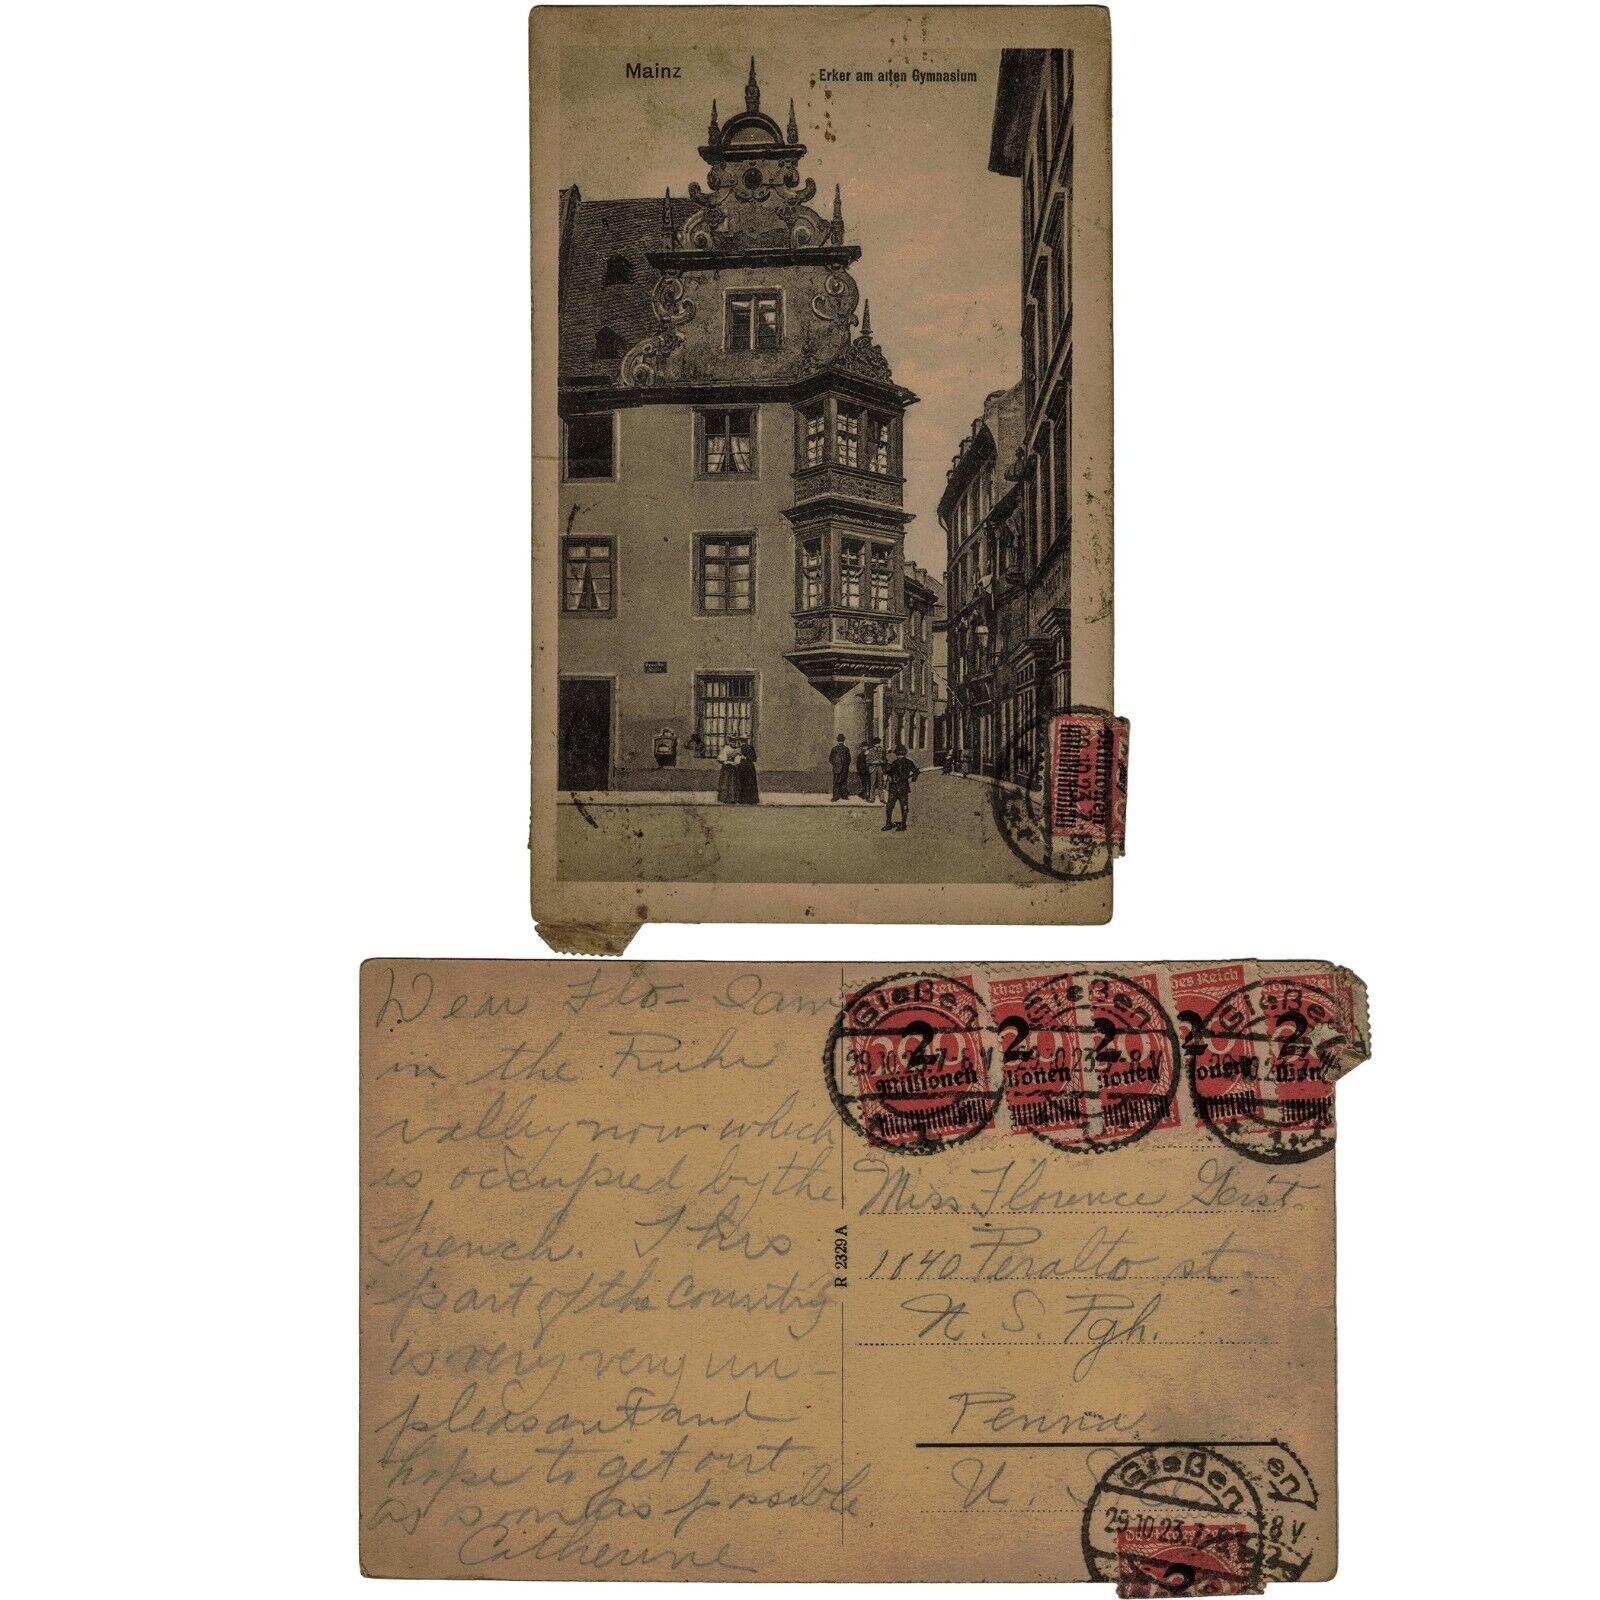 Rare 1923 German Postcard with Hyperinflation Stamps & Historical Message